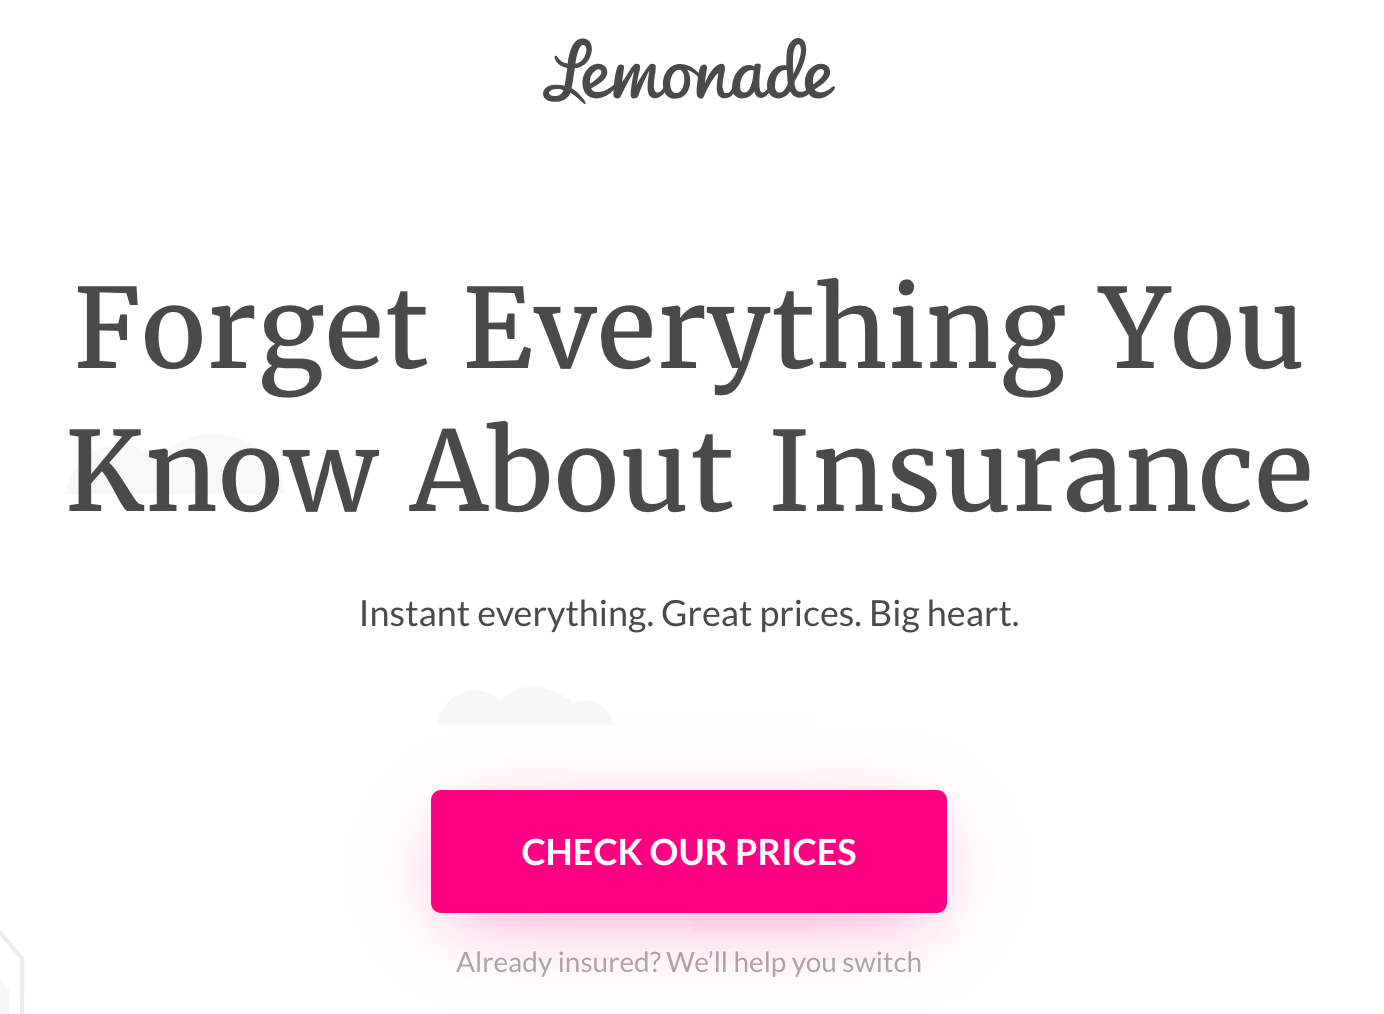 Lemonade Insurance's headline "Forget Everything You Know About Insurance"